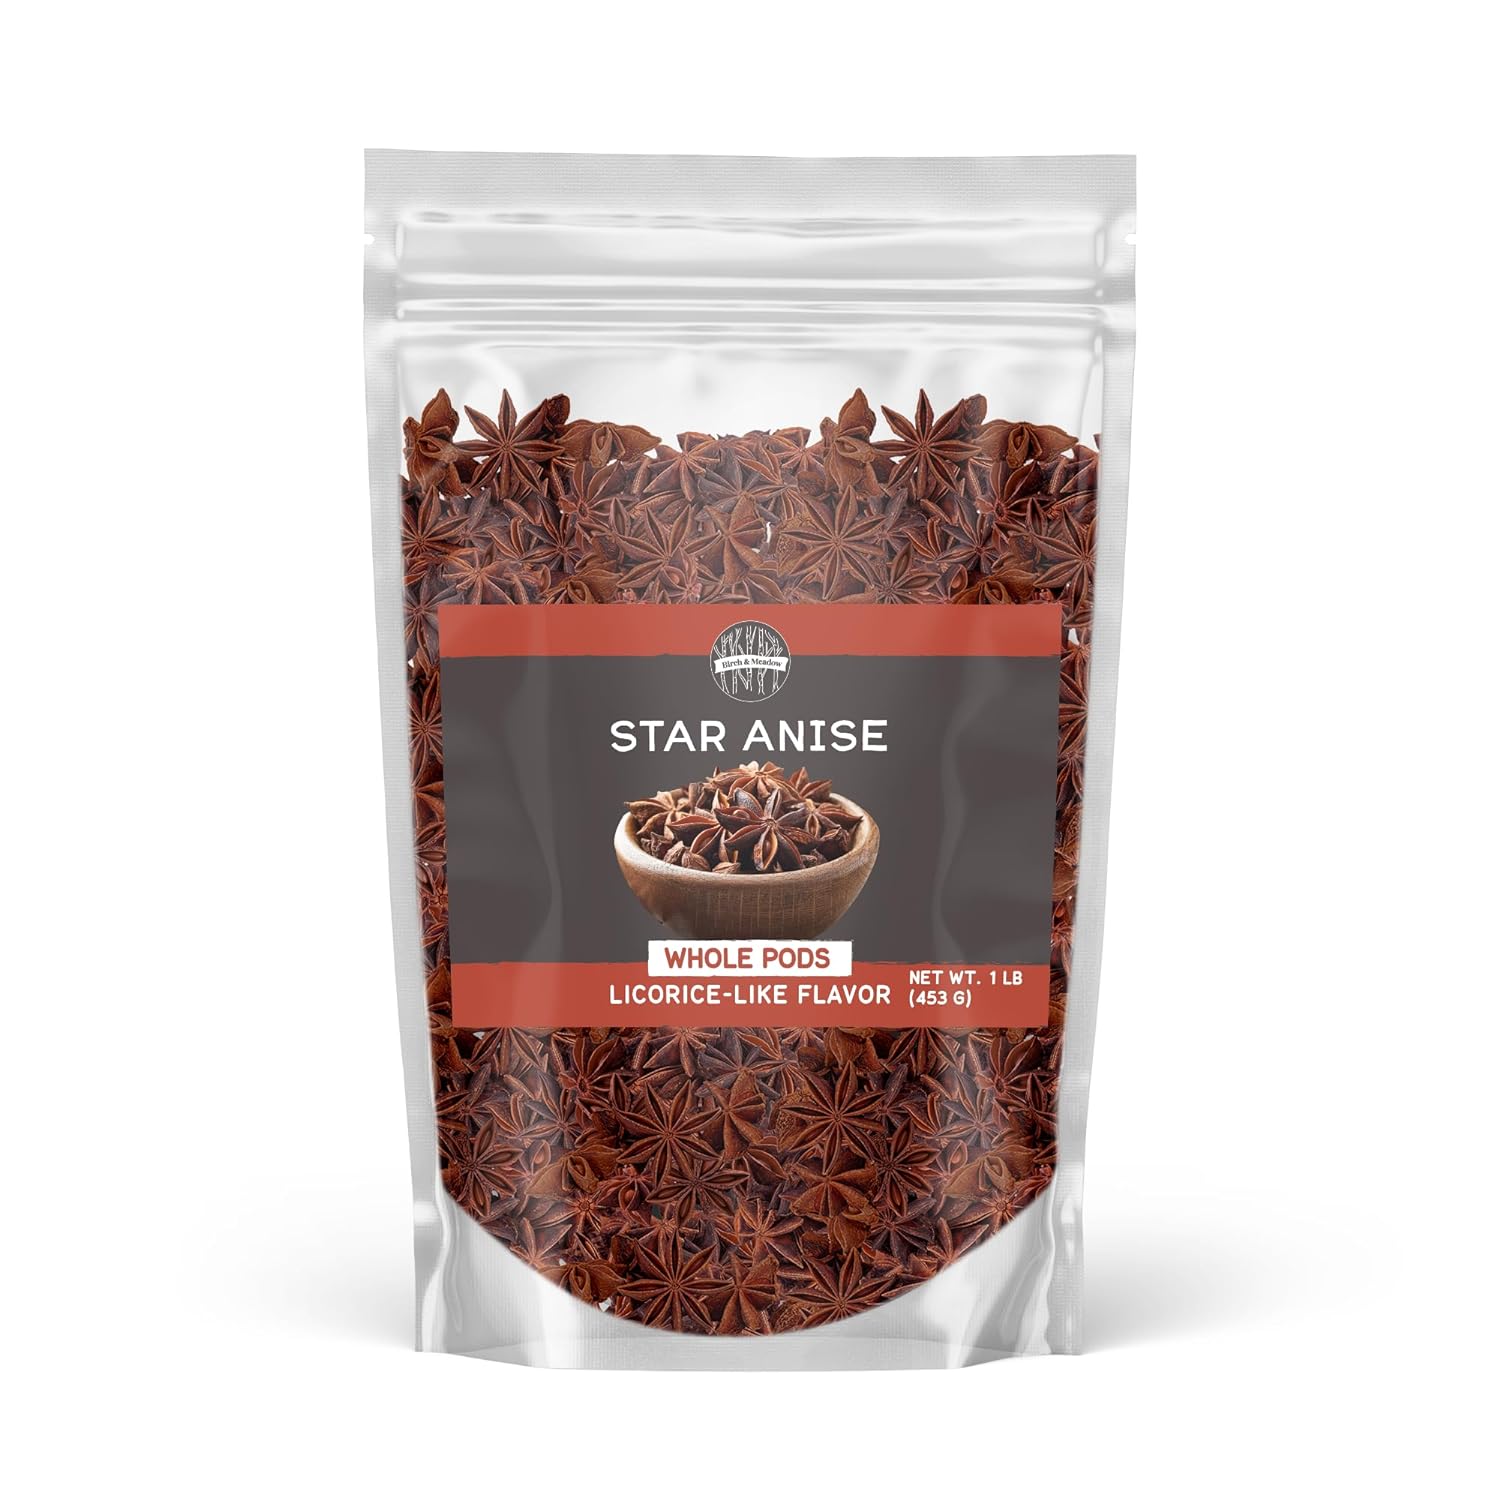 Birch & Meadow Whole Star Anise, 1 lb, Whole Pods, Teas & Baking